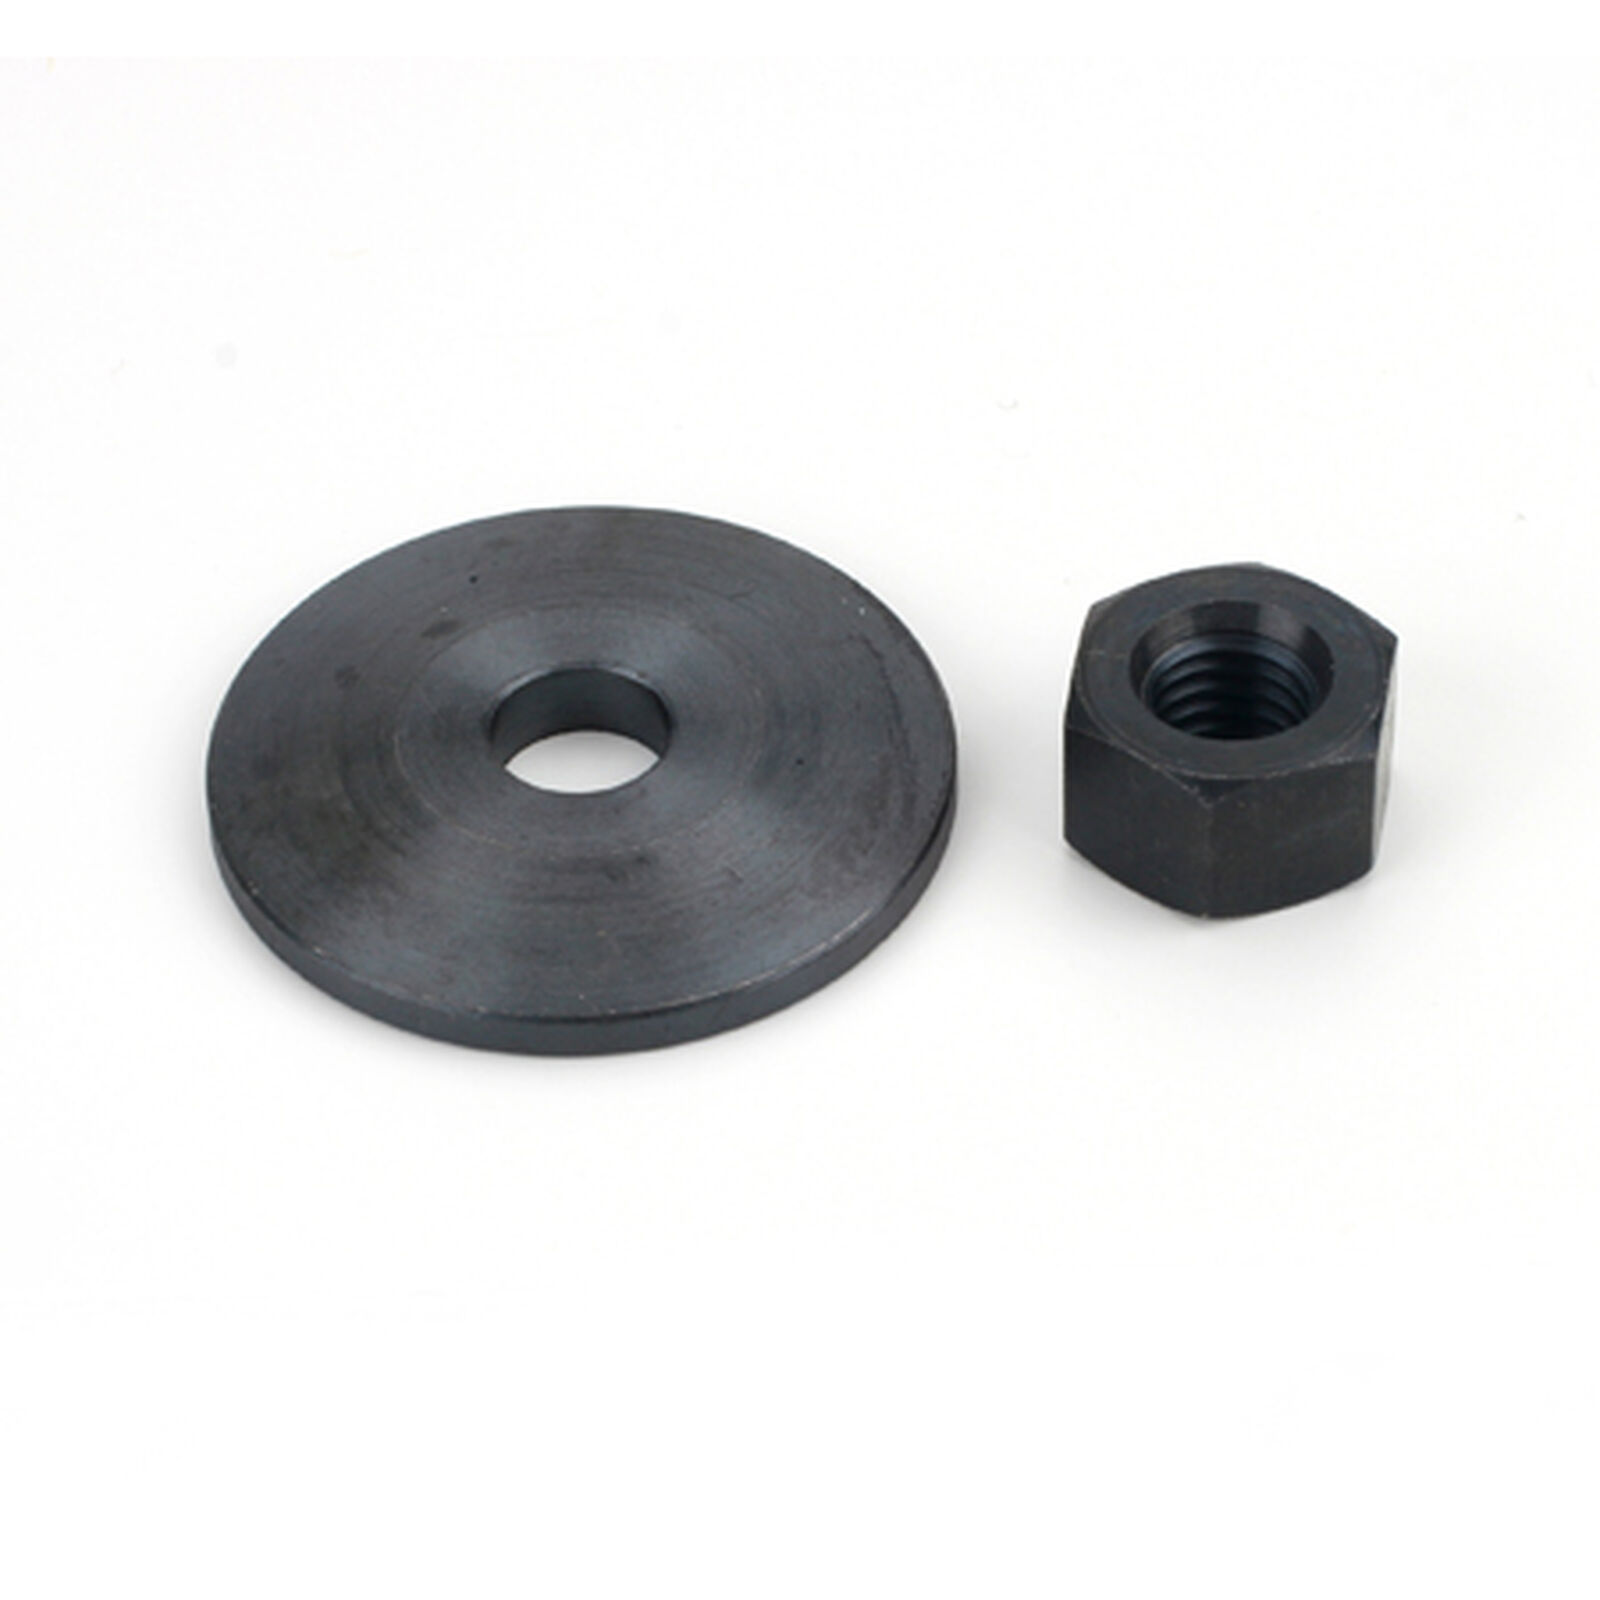 Prop Washer & Nut: 120-220A, BO, BP